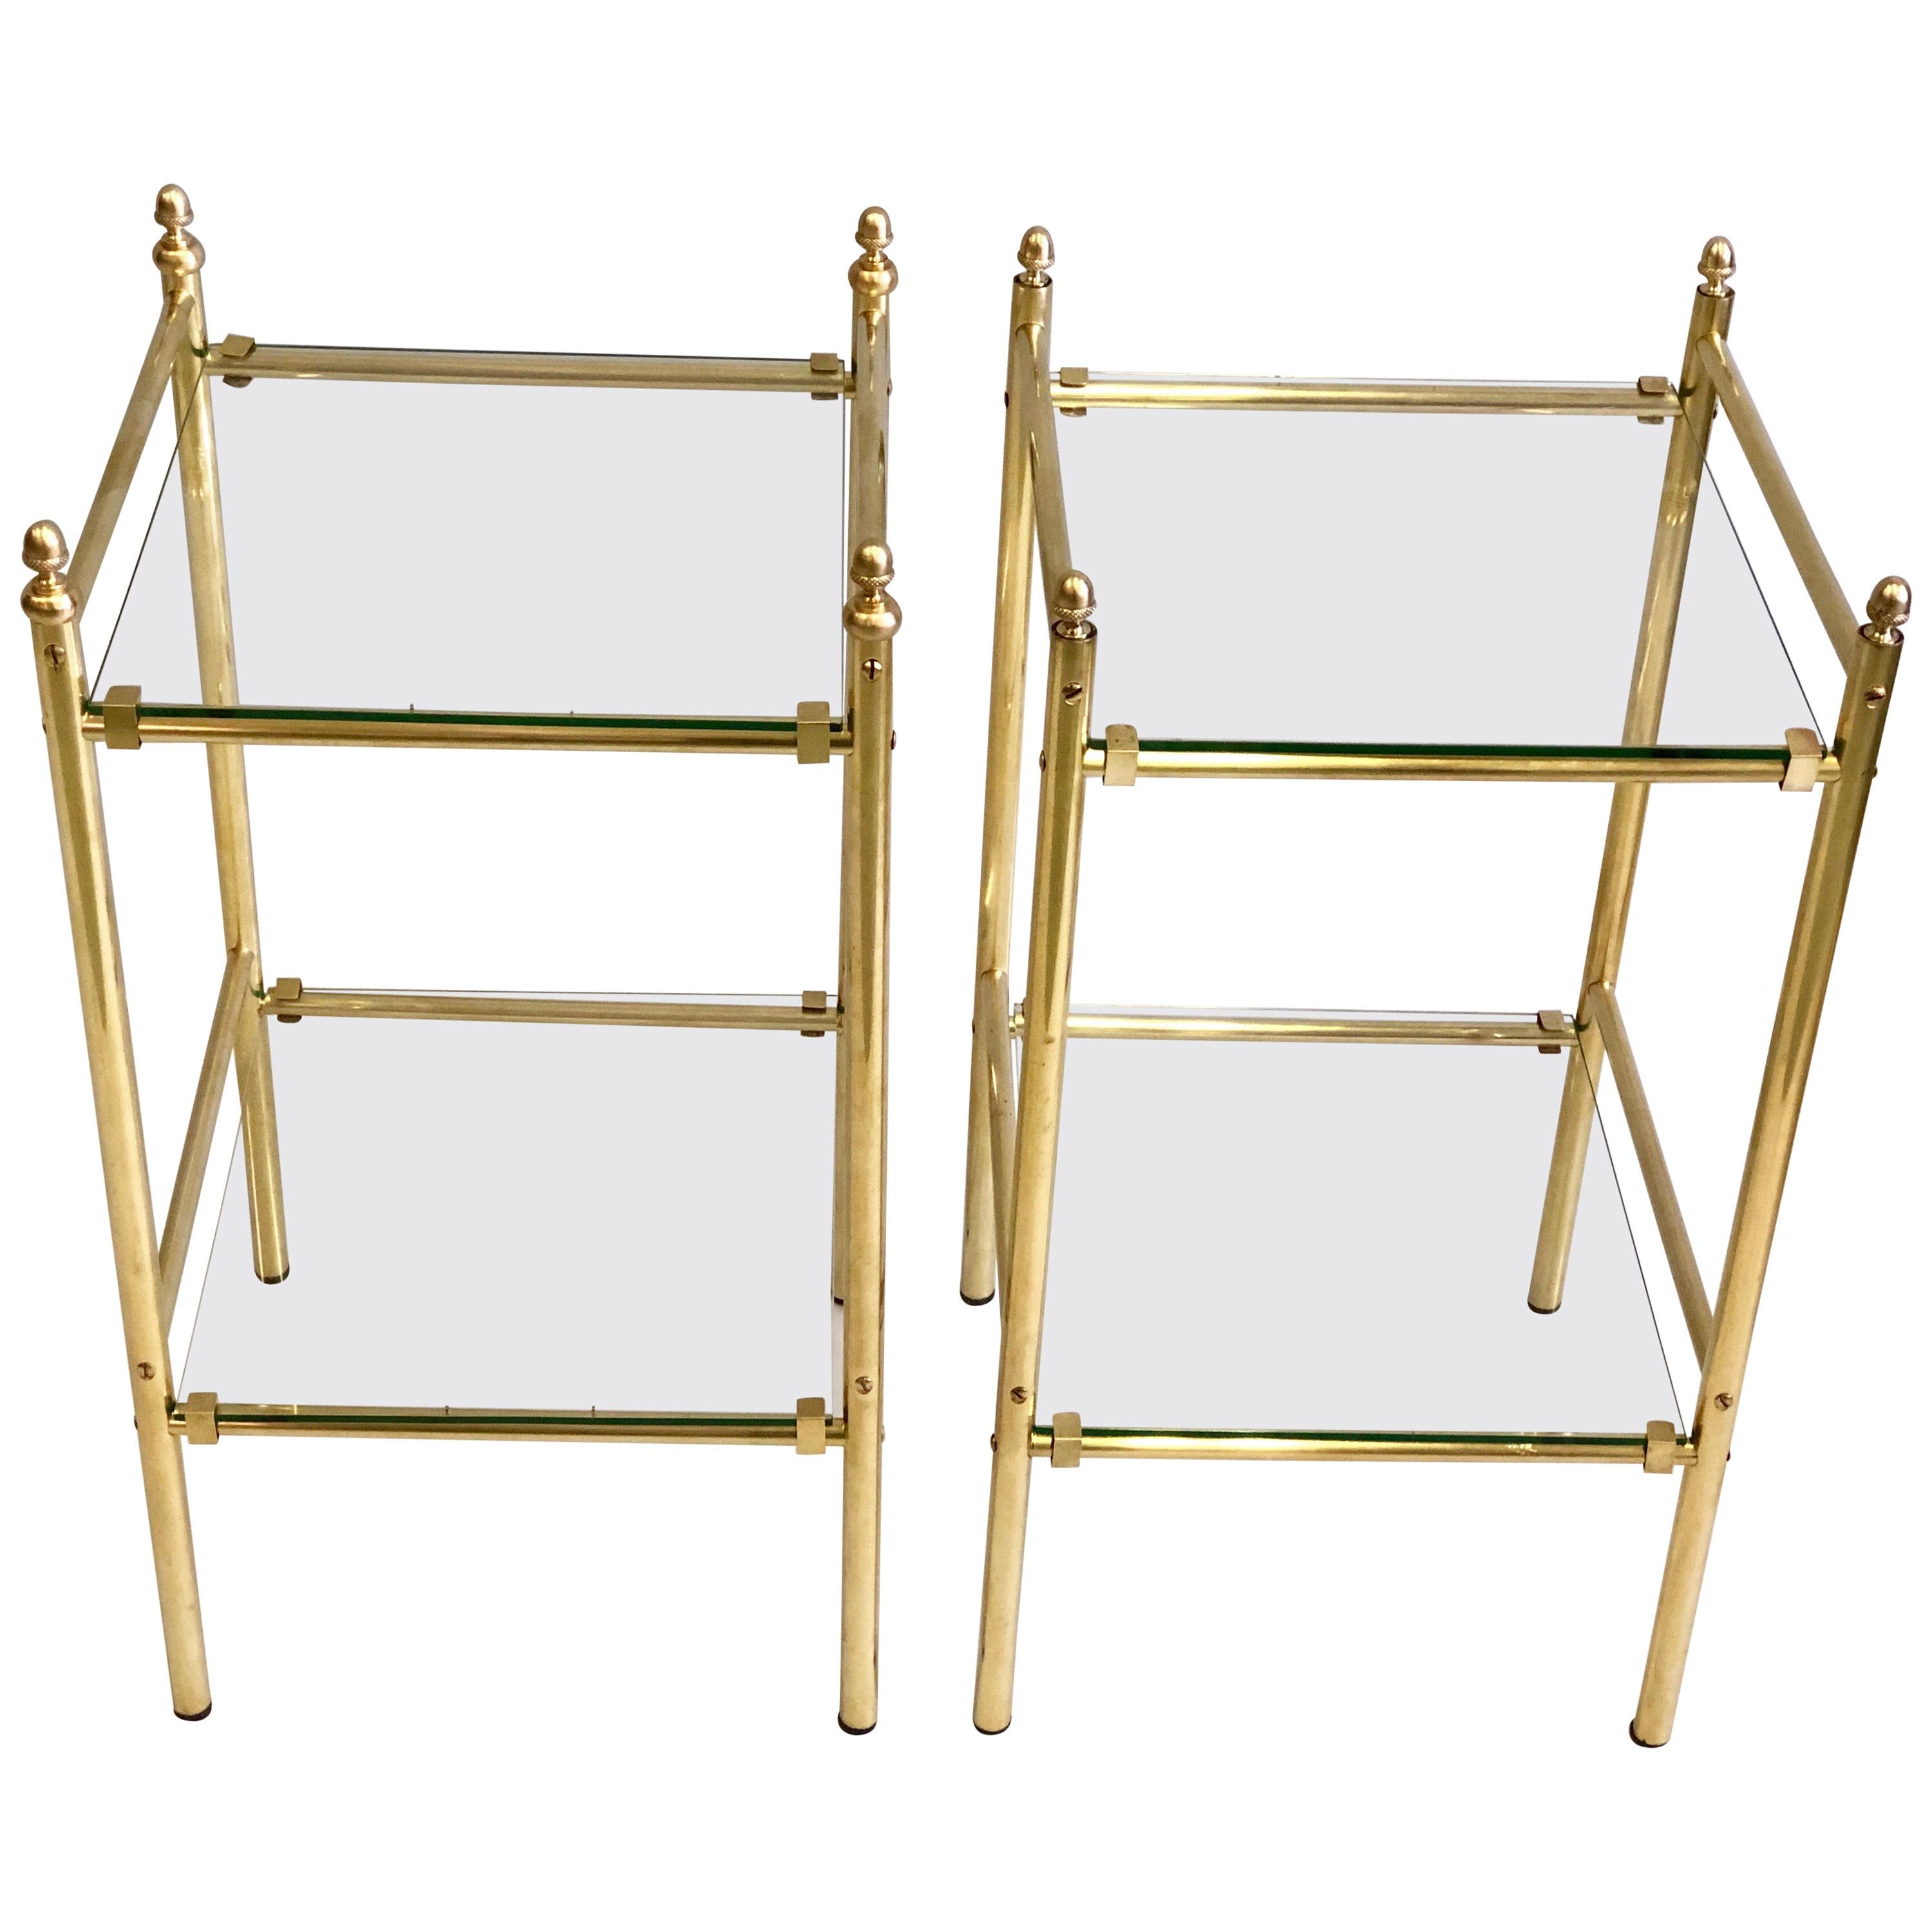 Pair of French Modern Neoclassical Double Level Brass Side Tables, Maison Jansen